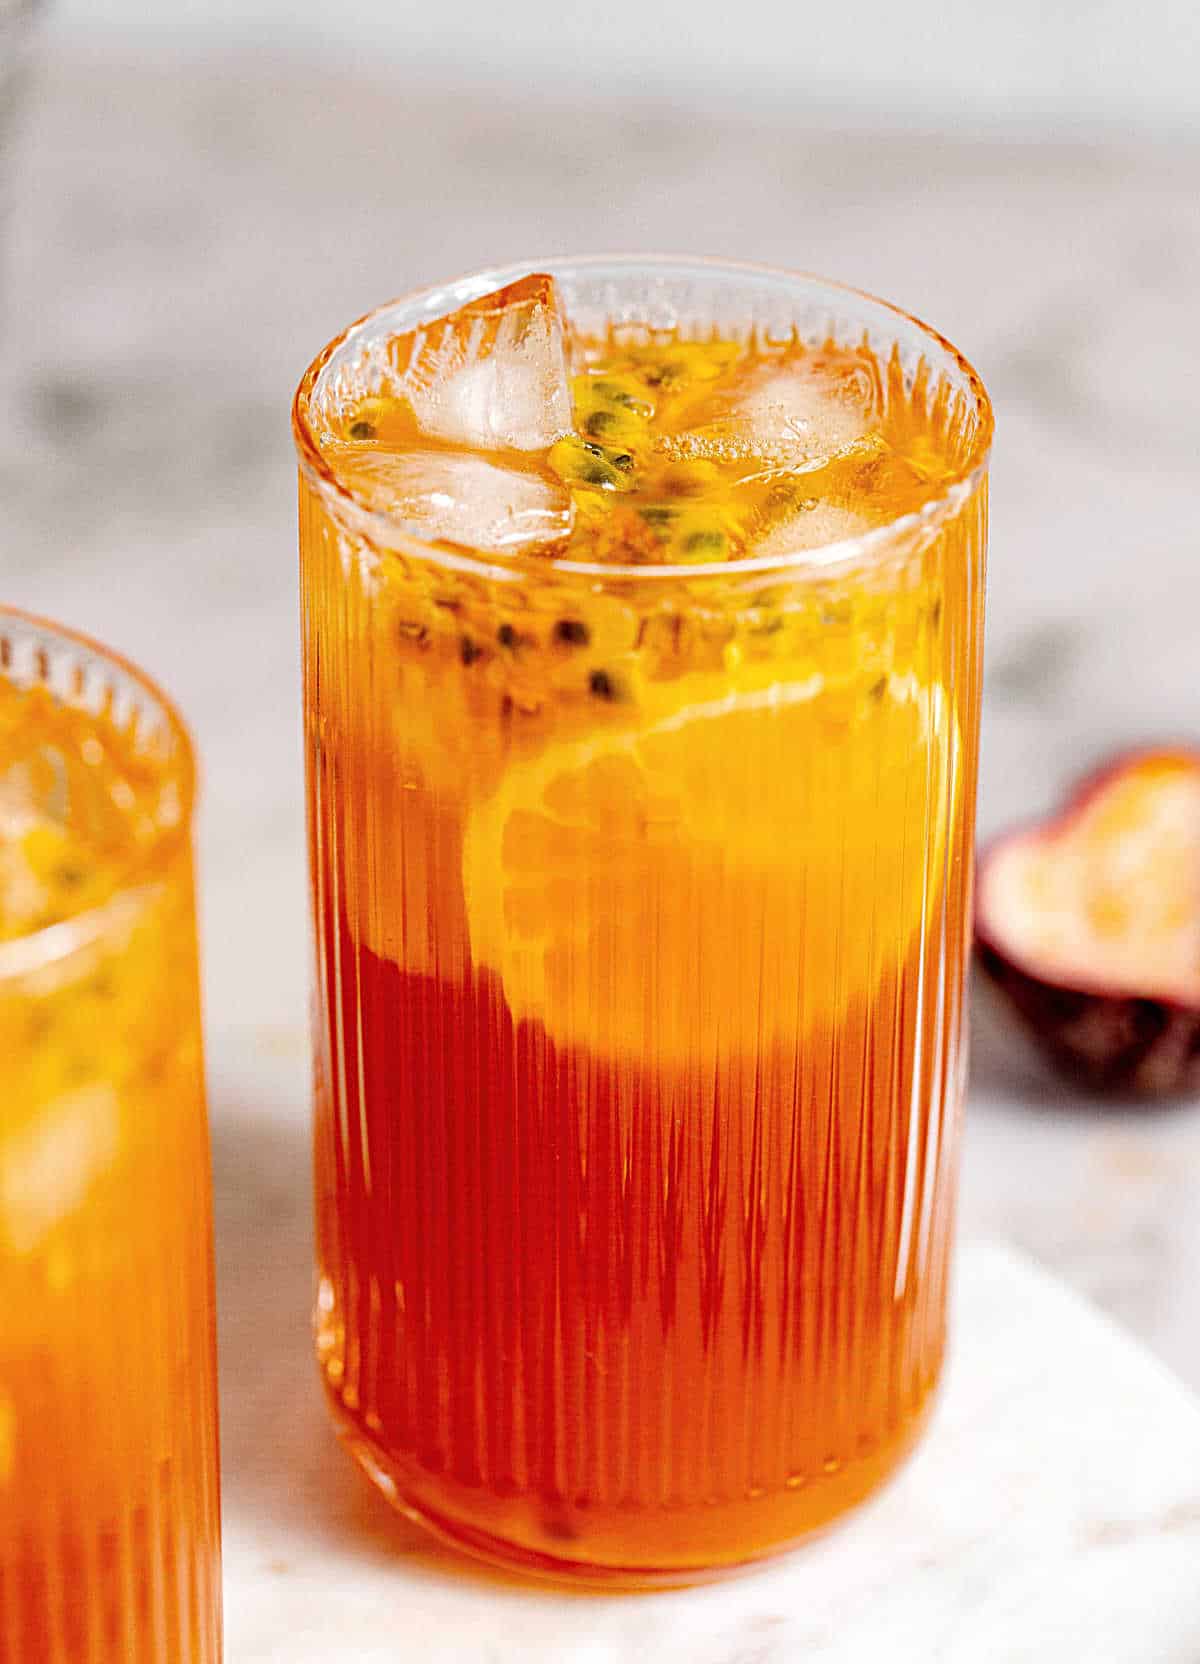 Tall glass of passionfruit tea on a marble board with grey background.